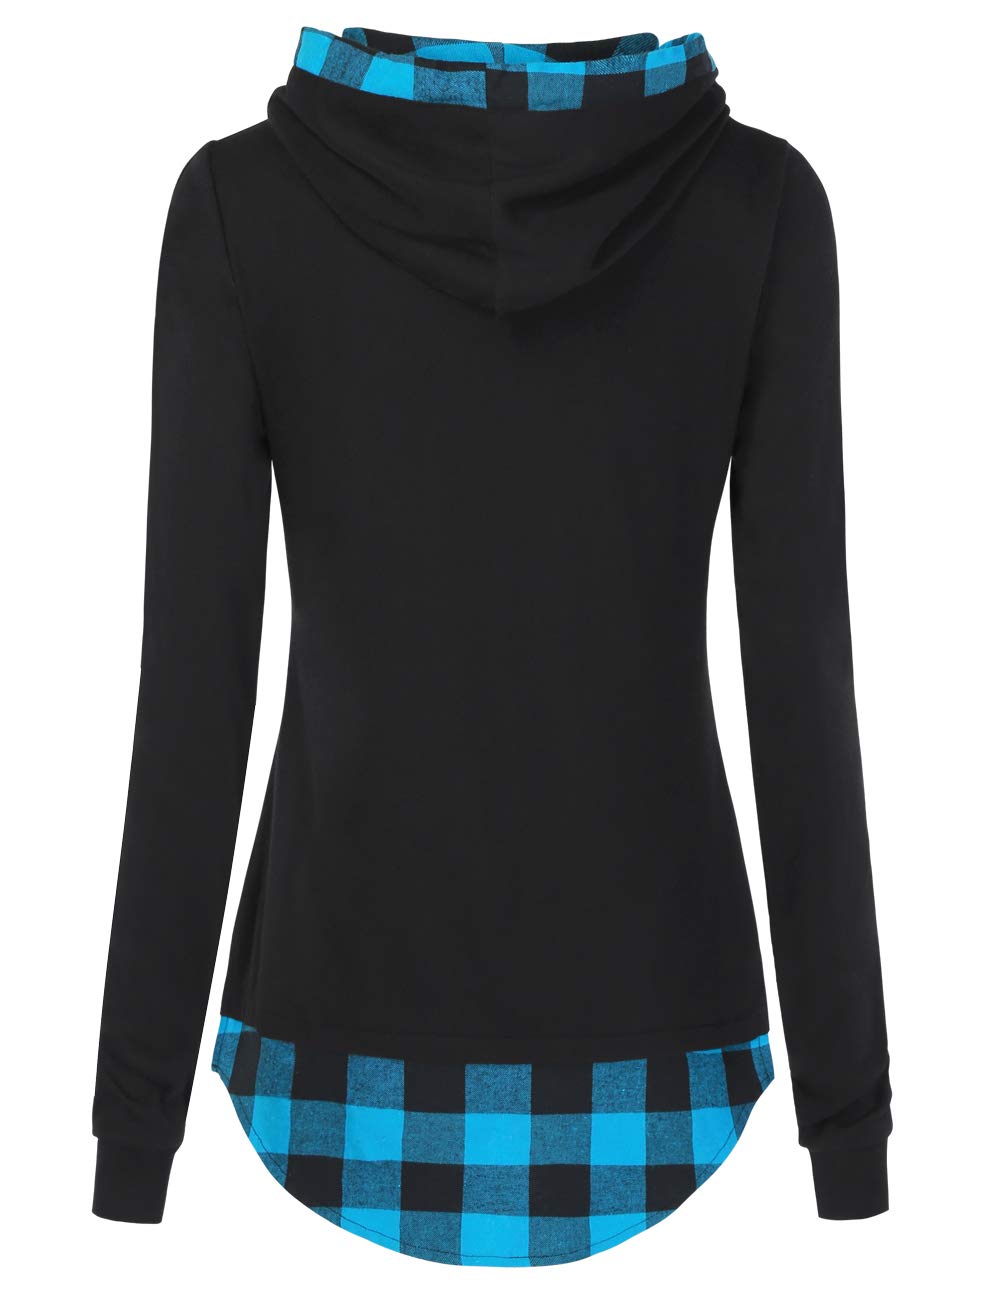 DJT Funnel Neck Black Blue Plaid Check Contrast Pullover Women's Hoodie Tops